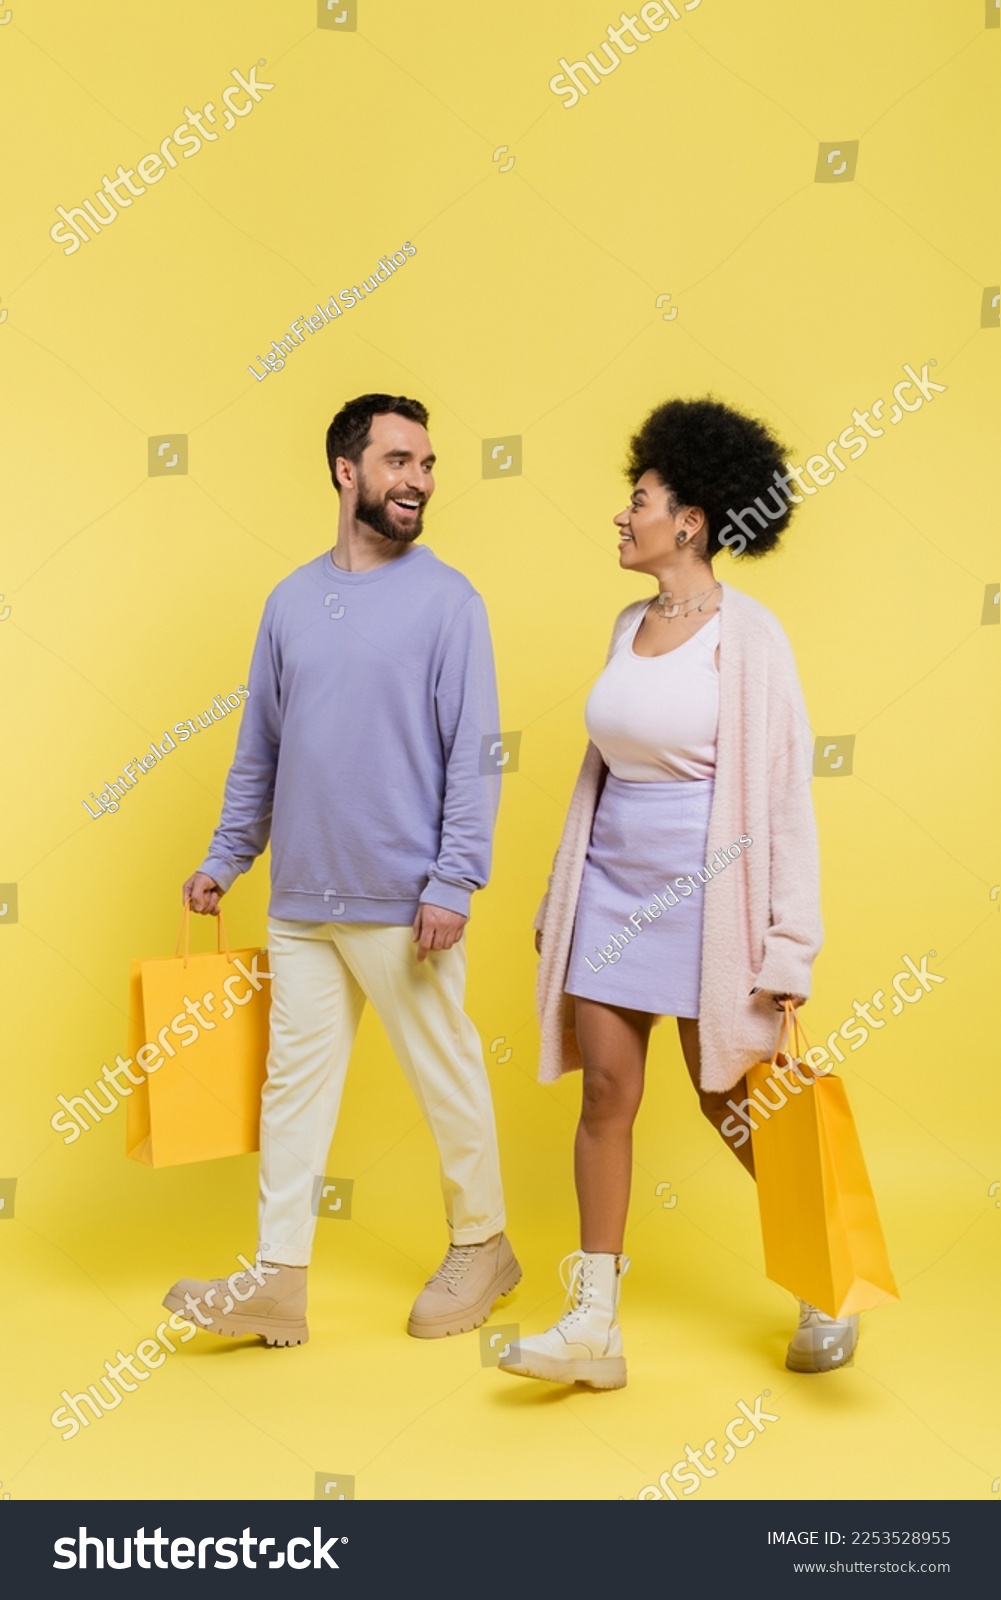 full length of happy and stylish interracial couple walking with shopping bags and looking at each other on yellow background #2253528955